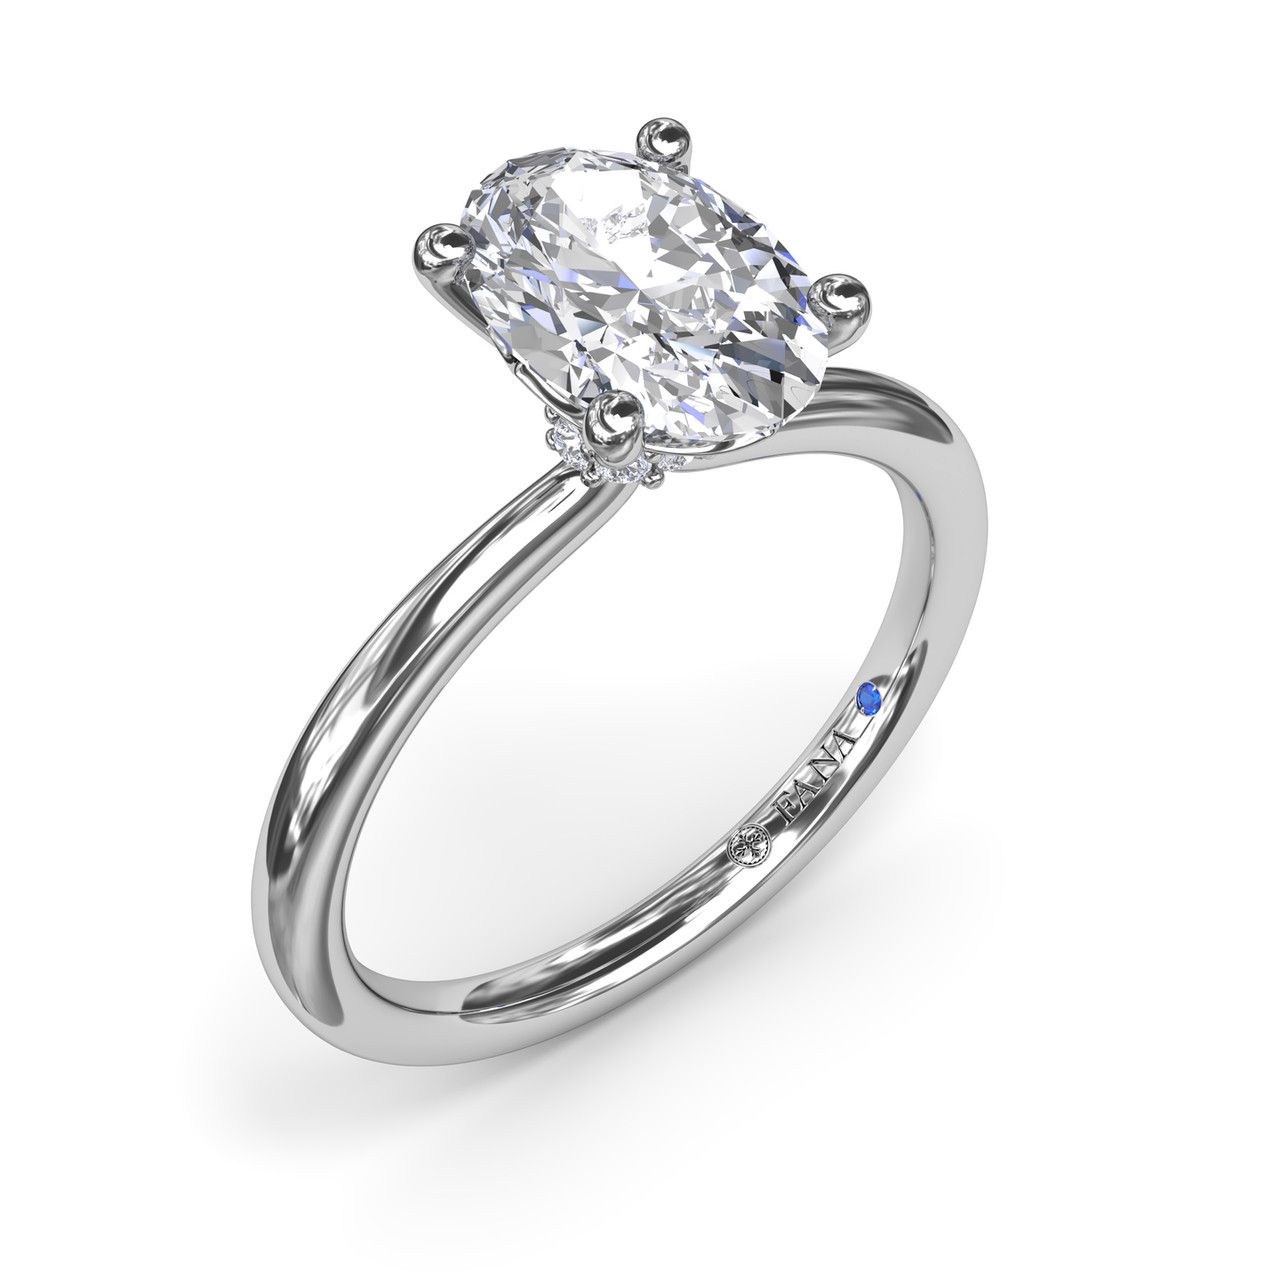 14K WHITE GOLD SOLITAIRE SEMI-MOUNT RING SIZE 6.5 WITH 8=0.06TW ROUND G-H VS2-SI1 DIAMONDS AND ONE ROUND BLUE SAPPHIRE    (3.00 GRAMS)